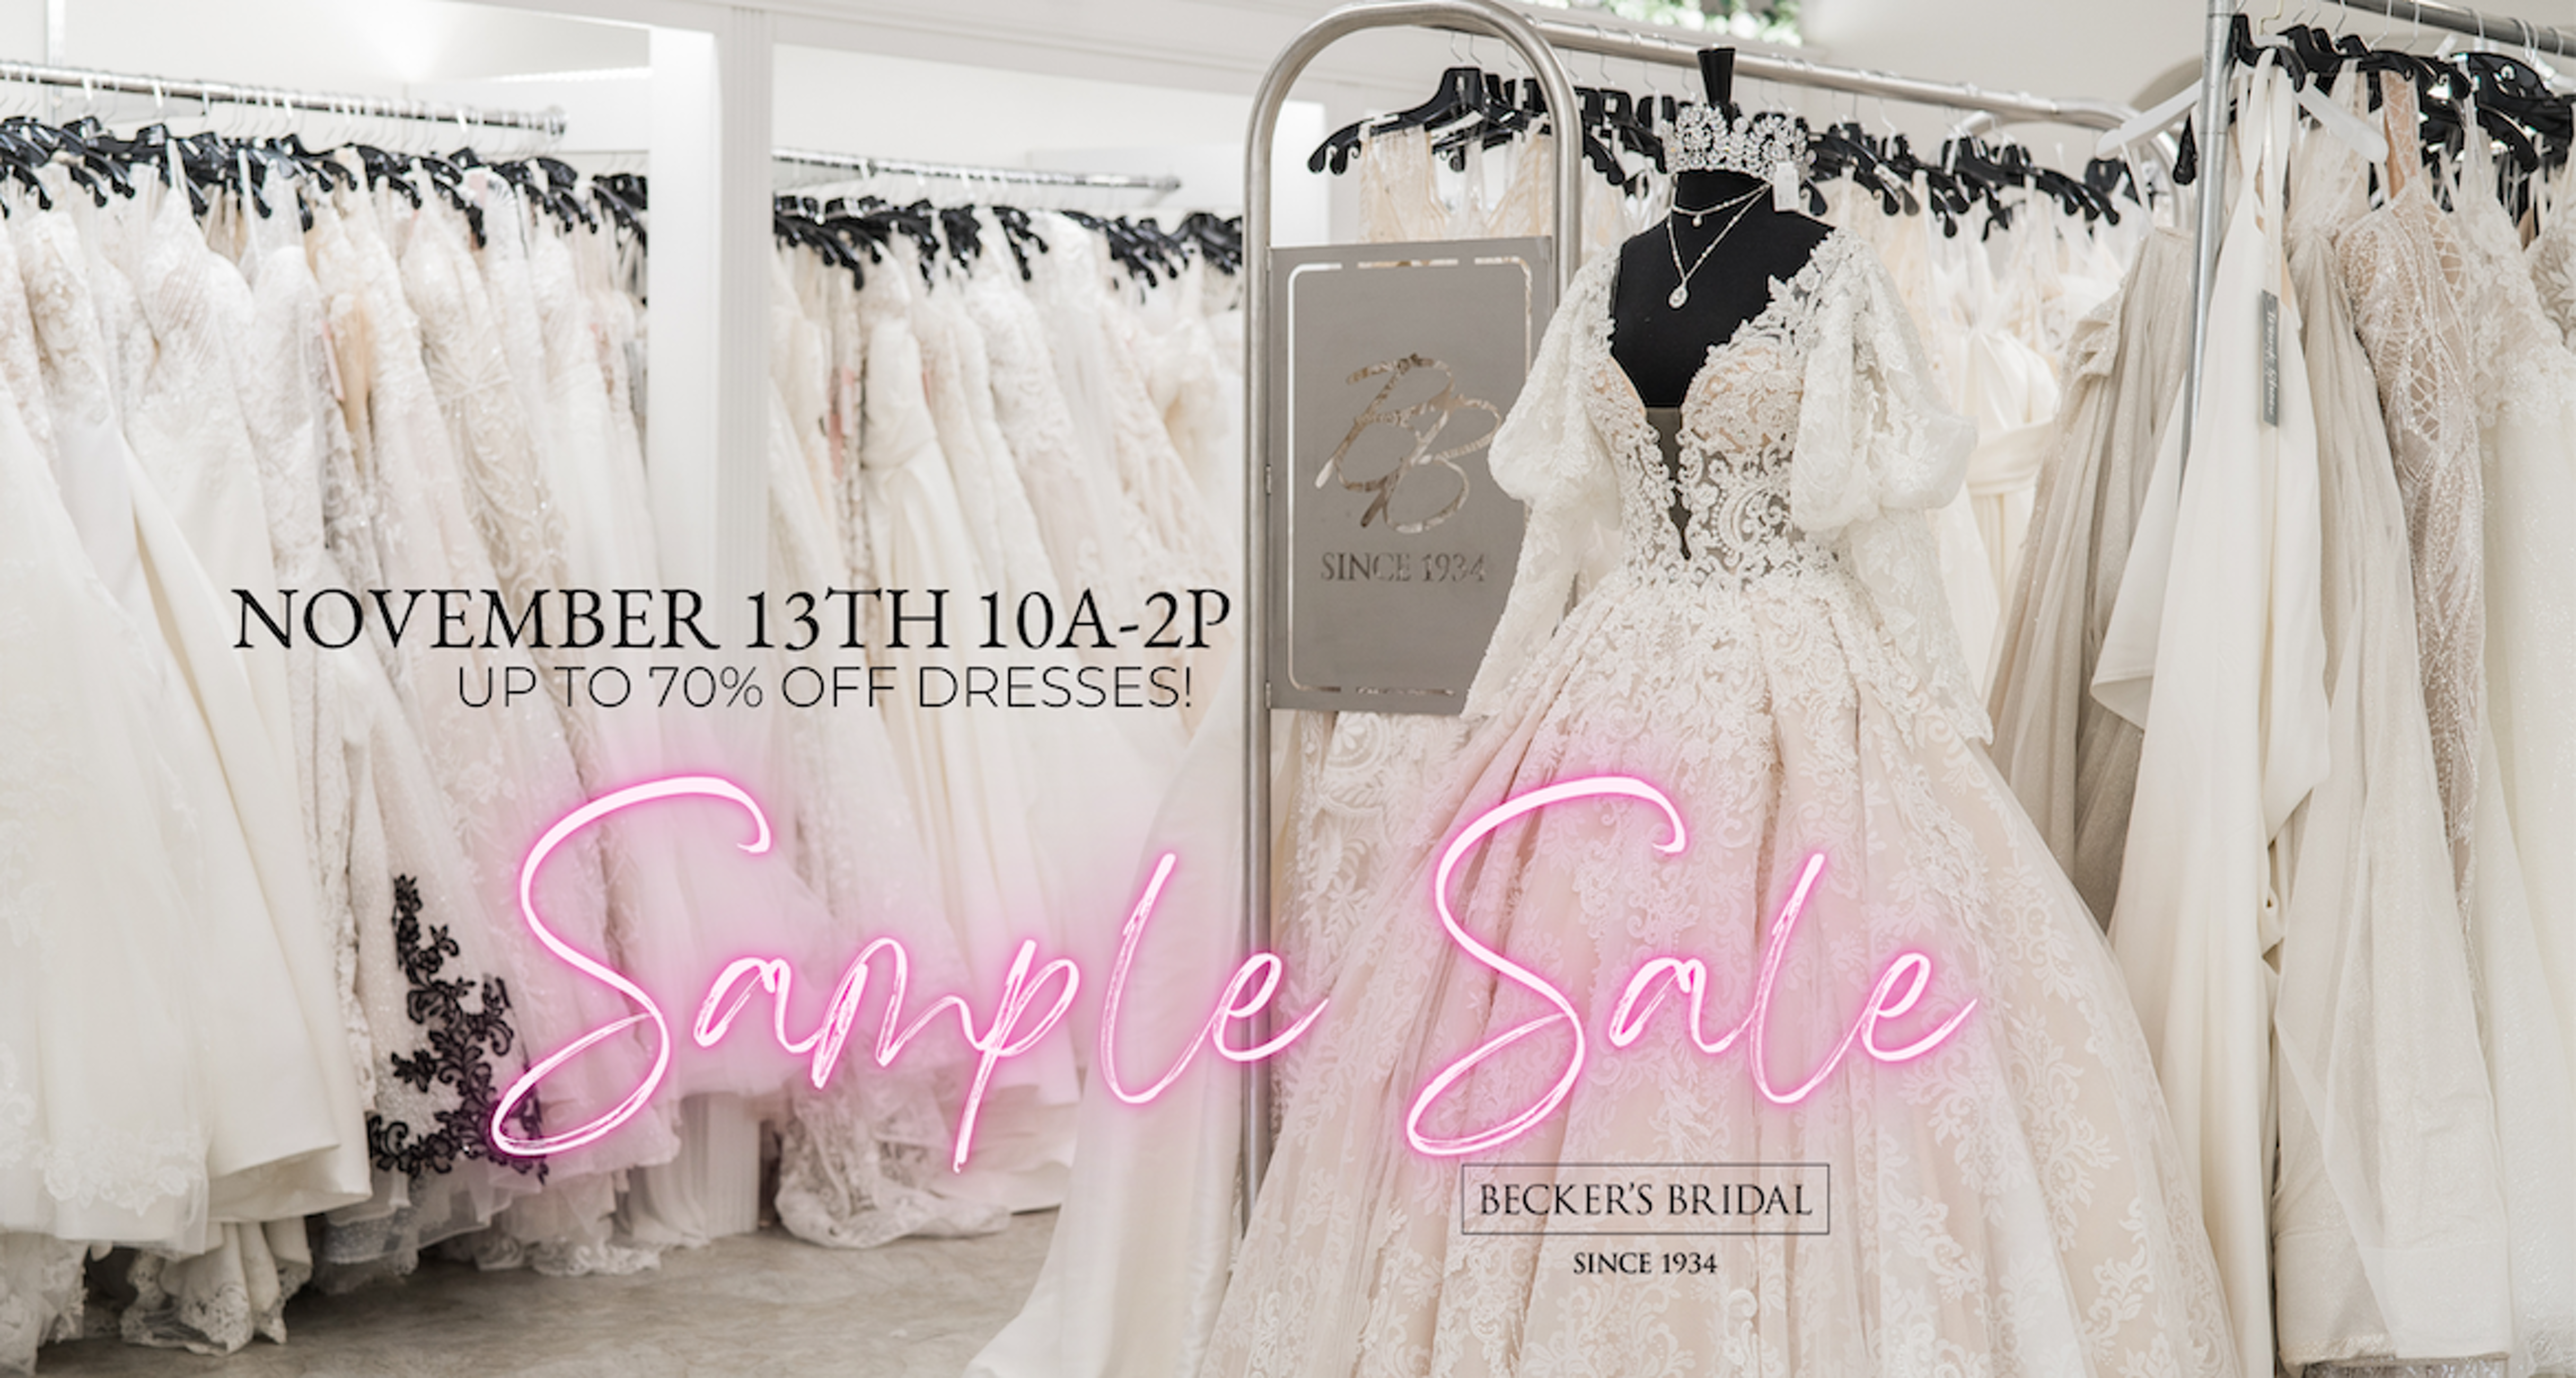 beckers-bridal-annual-sample-sale-wedding-dress-event